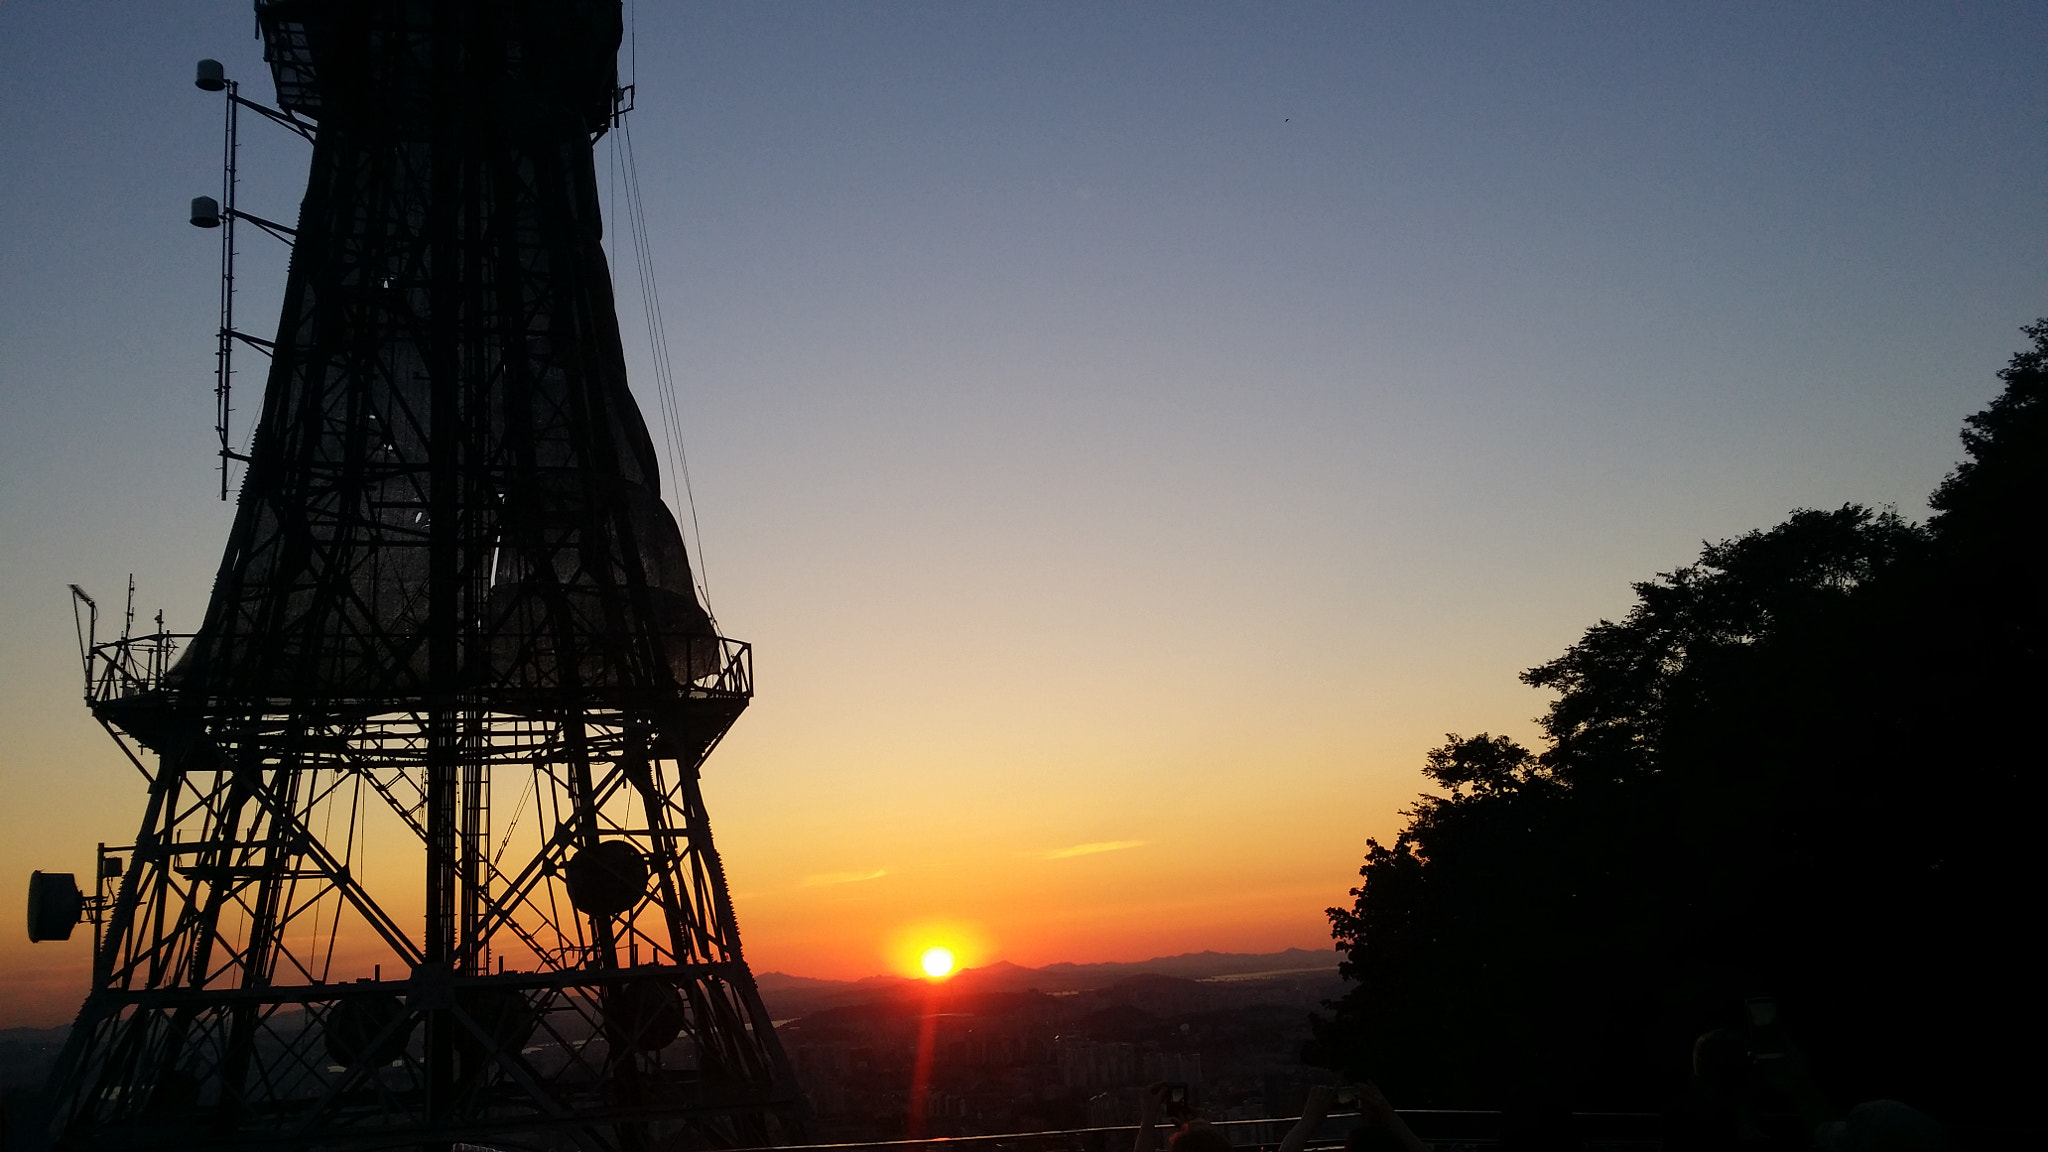 Samsung Galaxy S4 LTE-A sample photo. N seoultower sunset photography